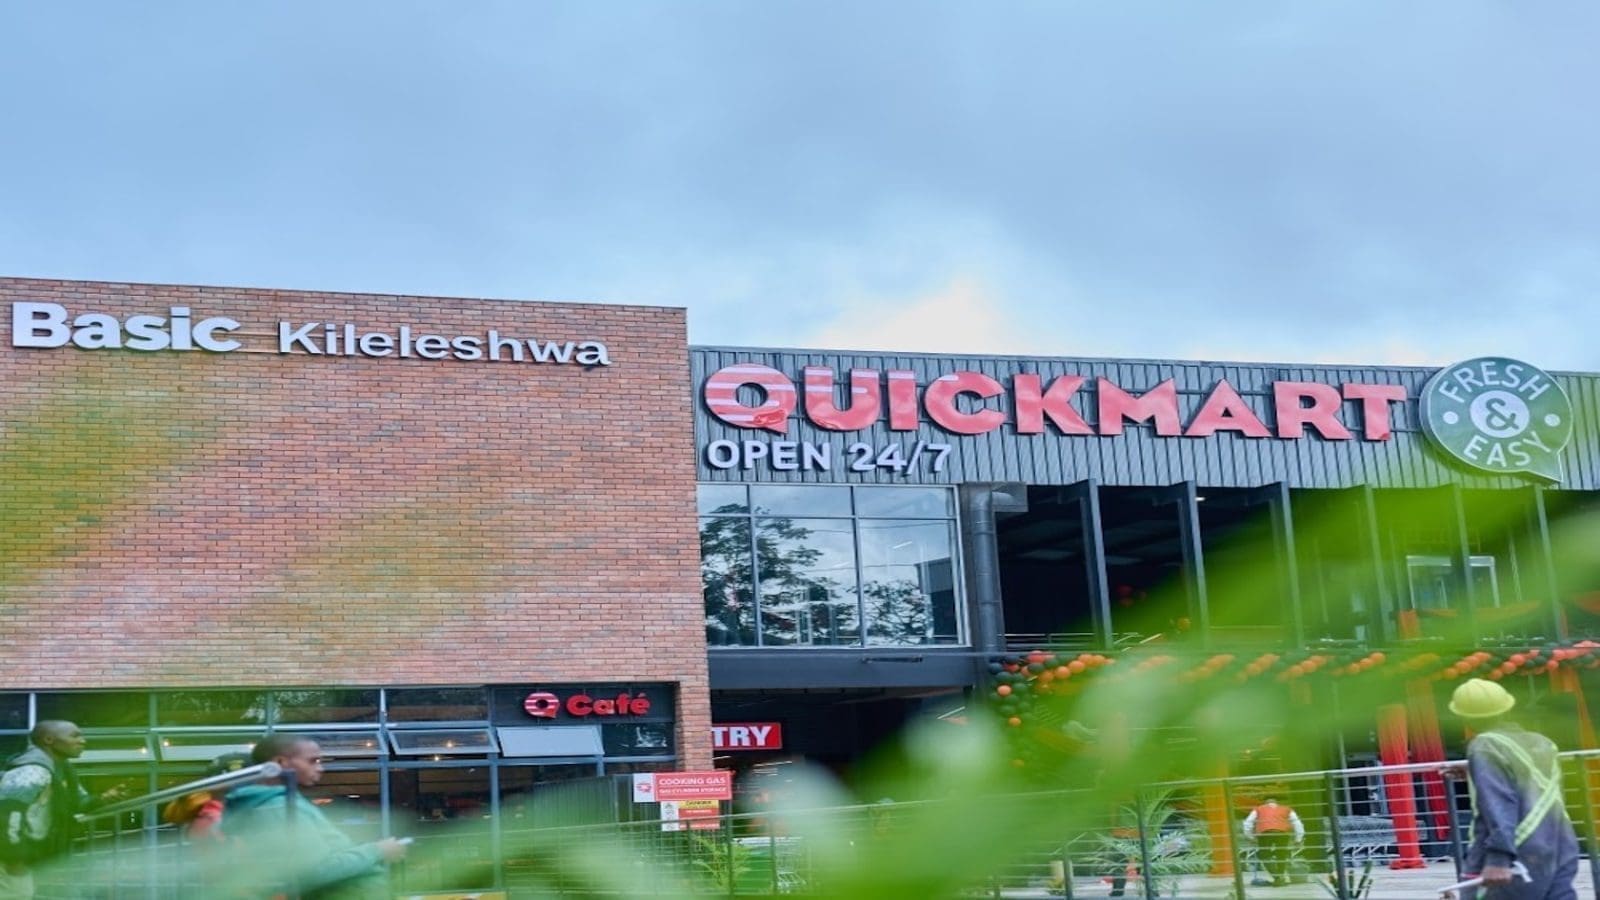 Quickmart fuels expansion drive in Kenya, opens 57th branch in Kileleshwa